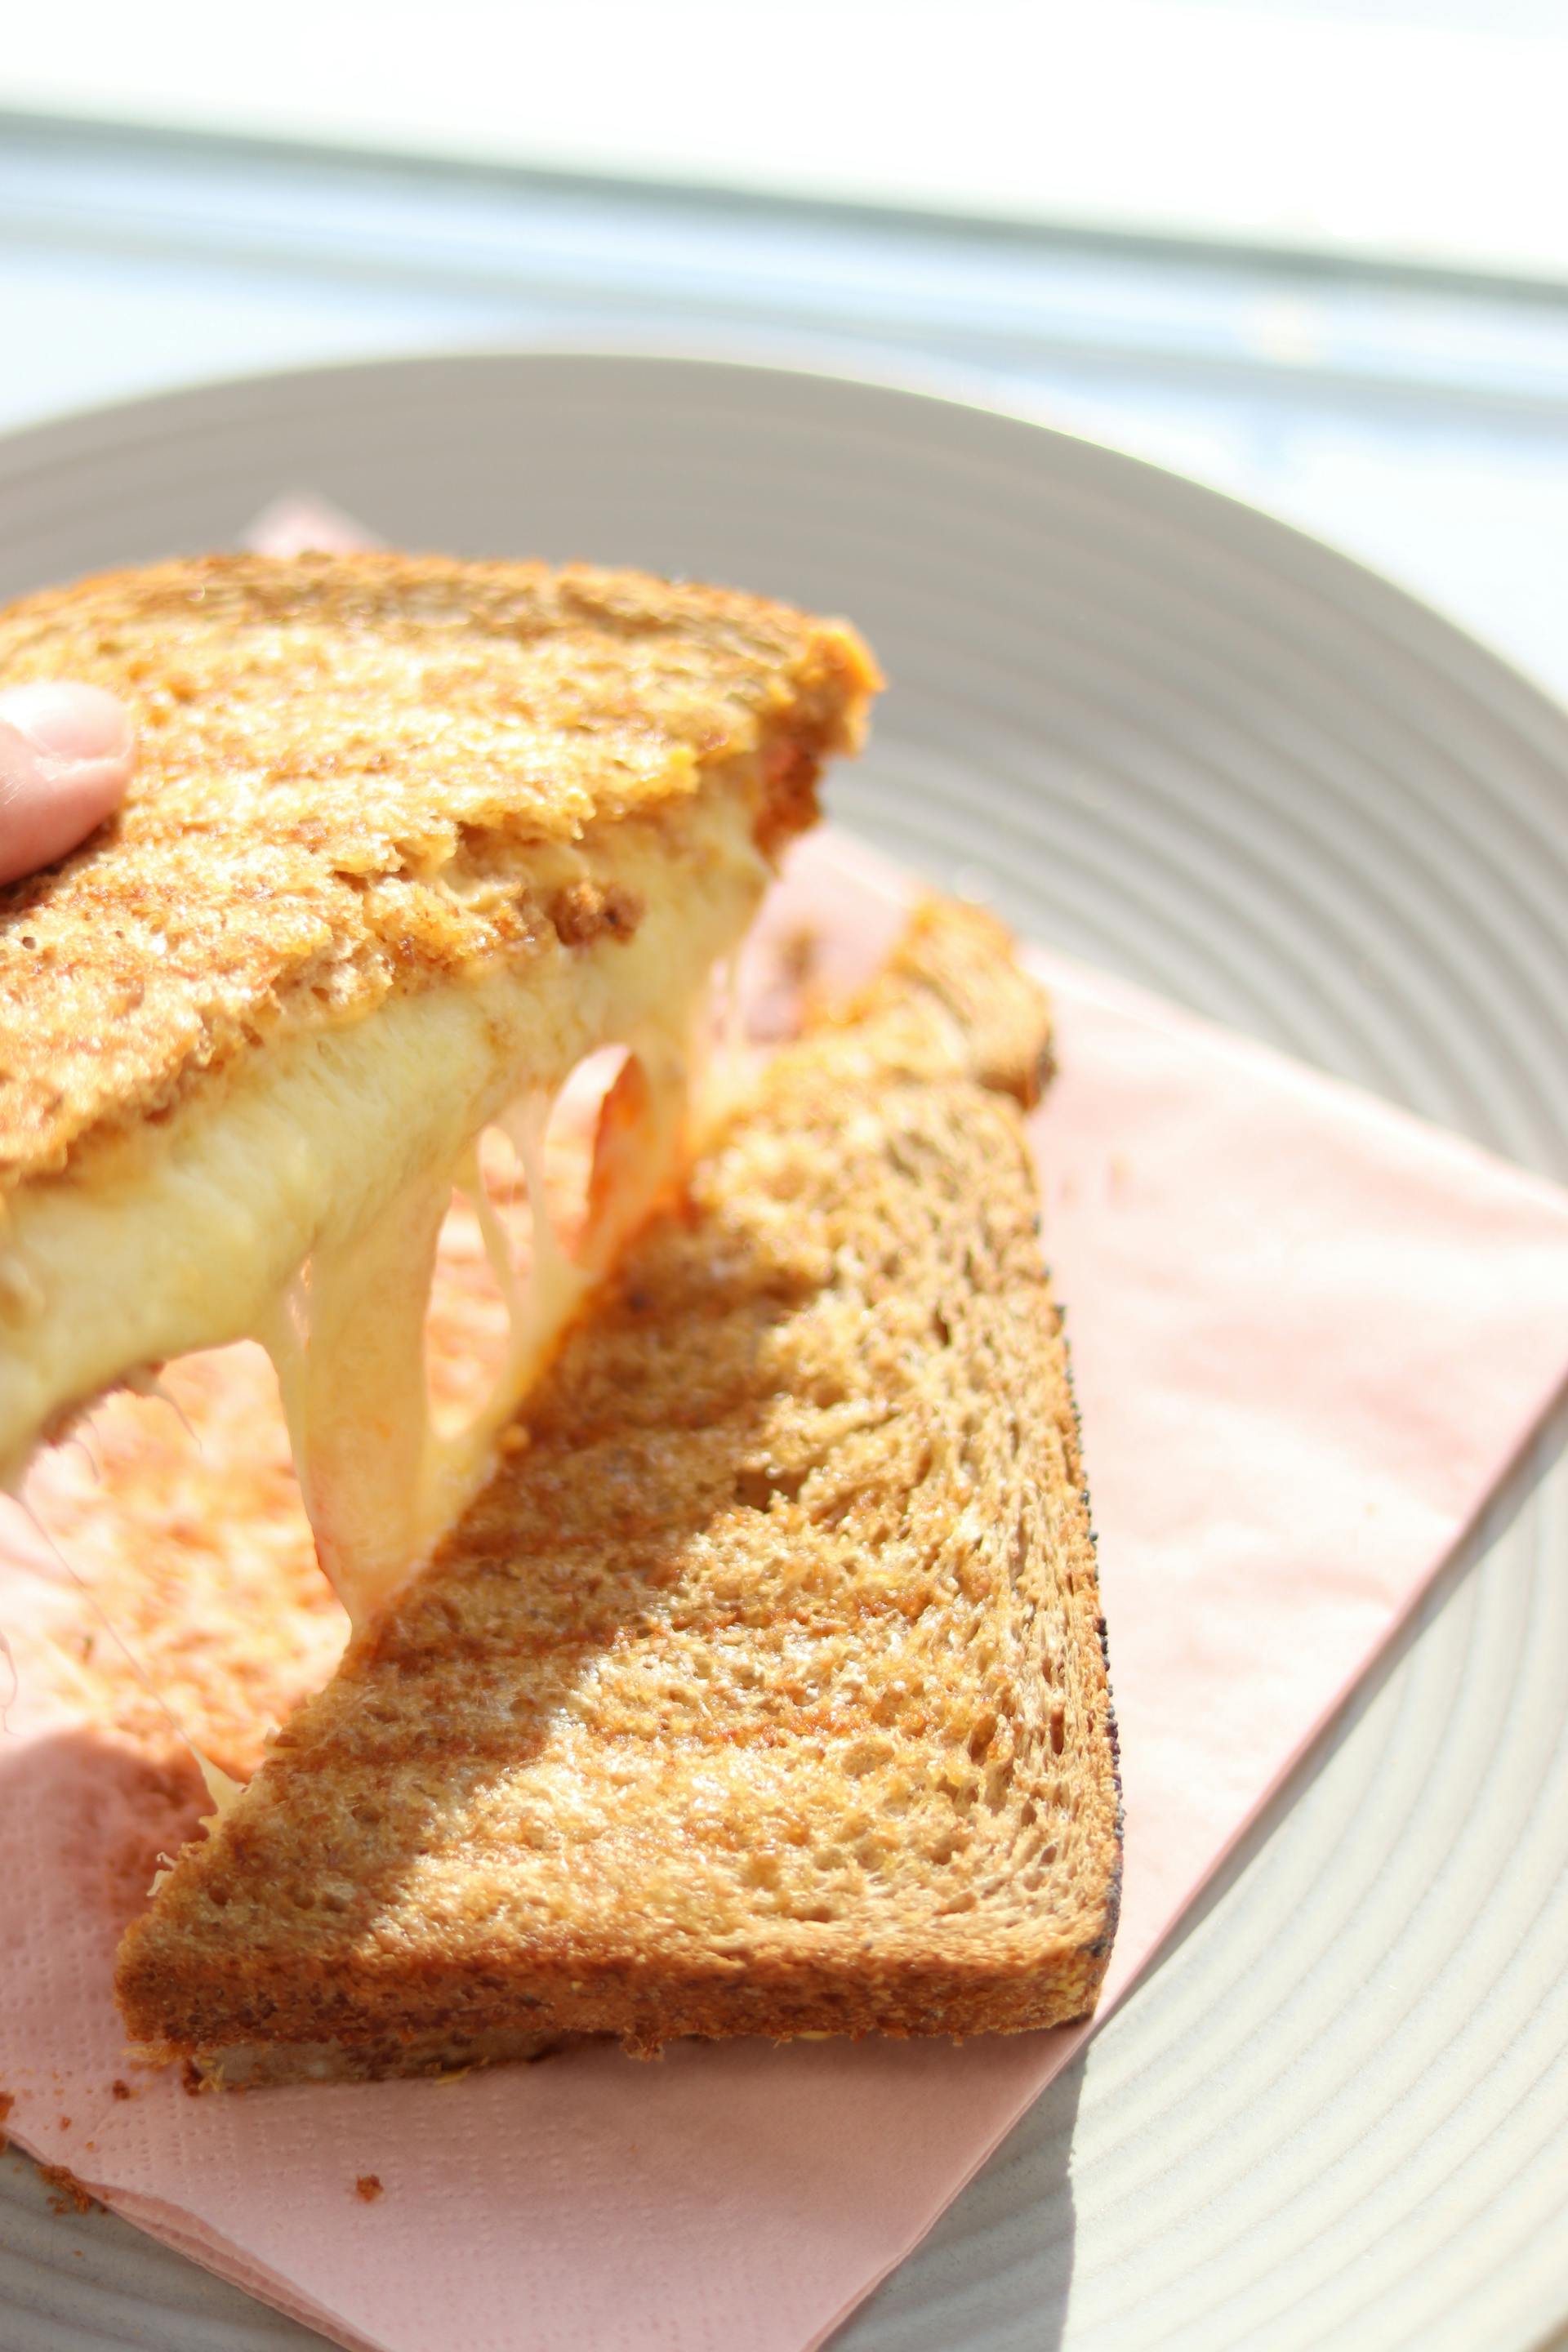 A toasted cheese sandwich | Source: Pexels